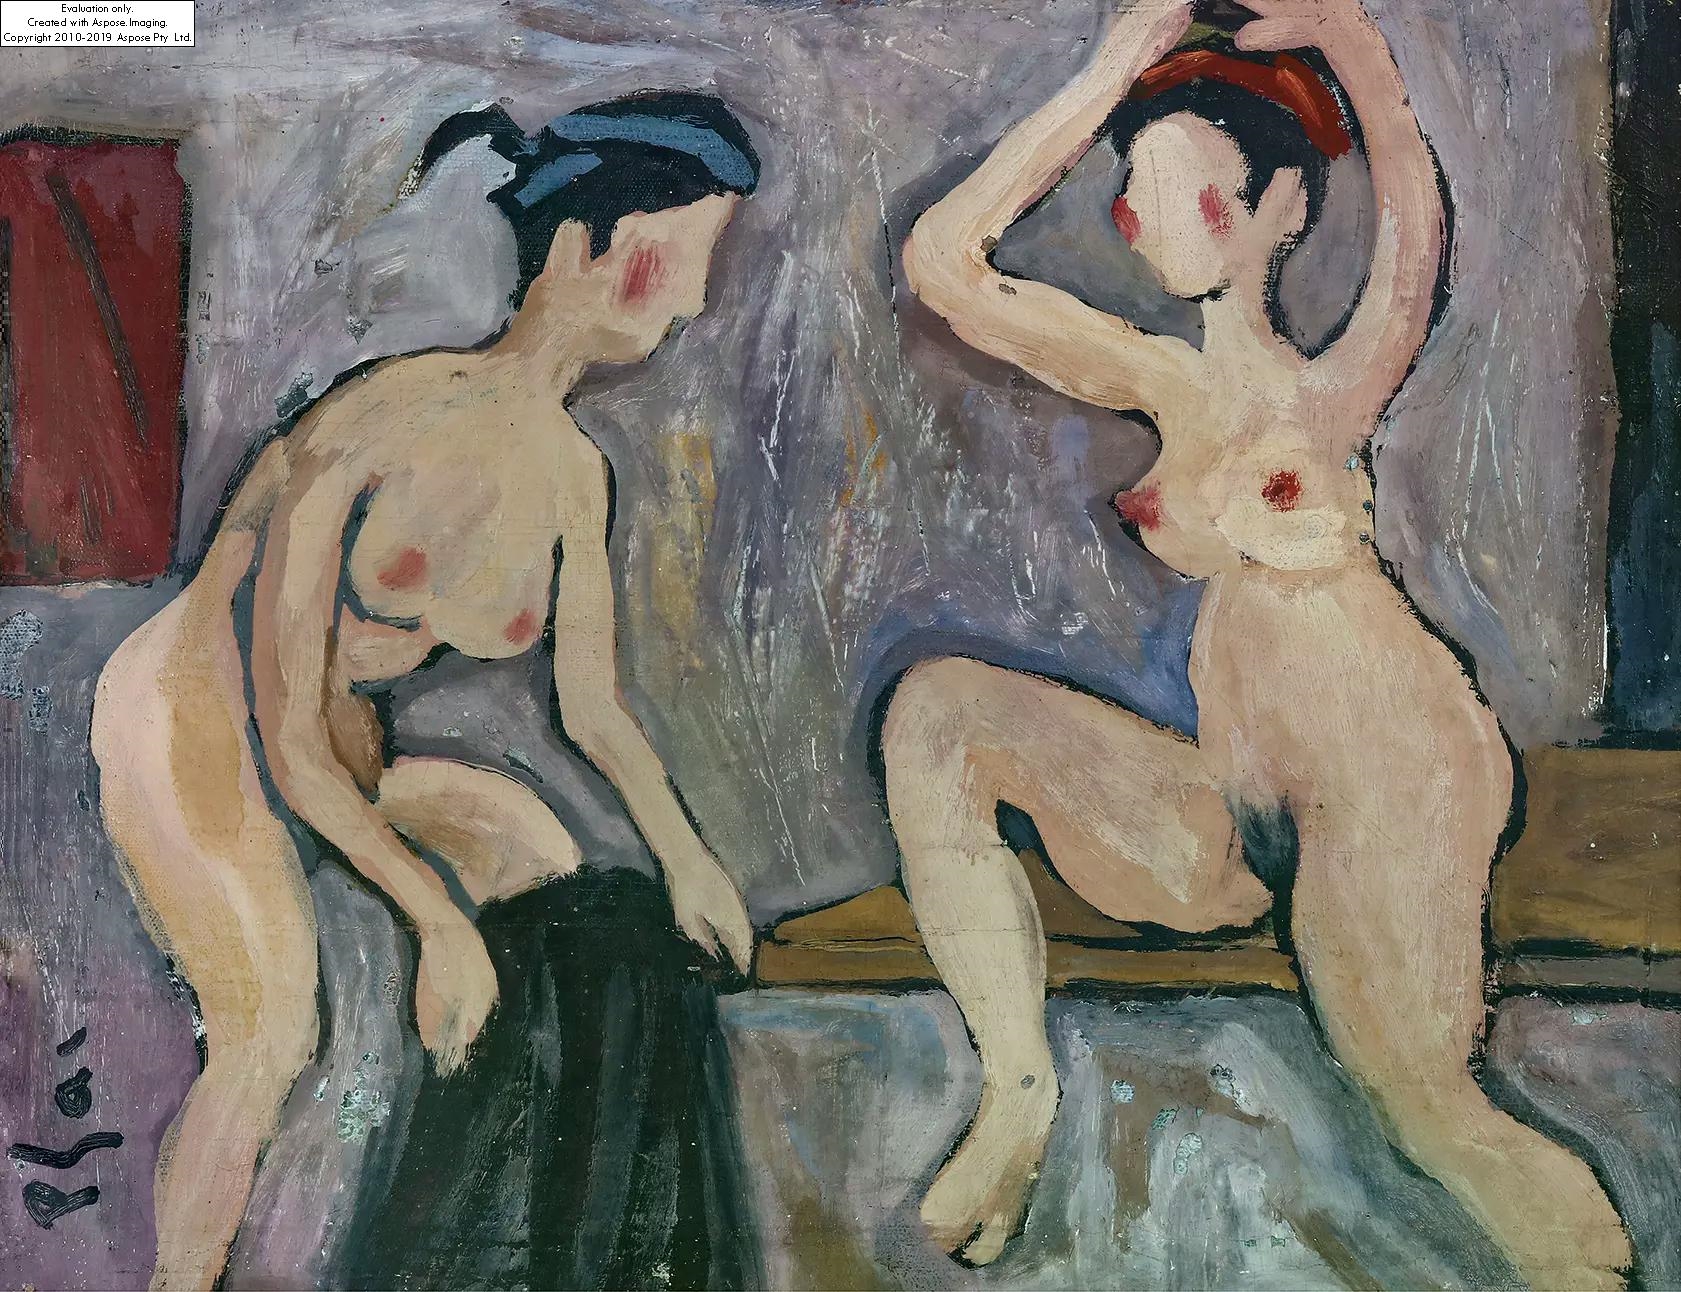 Nude Cheo Actors by Bui Xuan Phai, Painted circa 1960